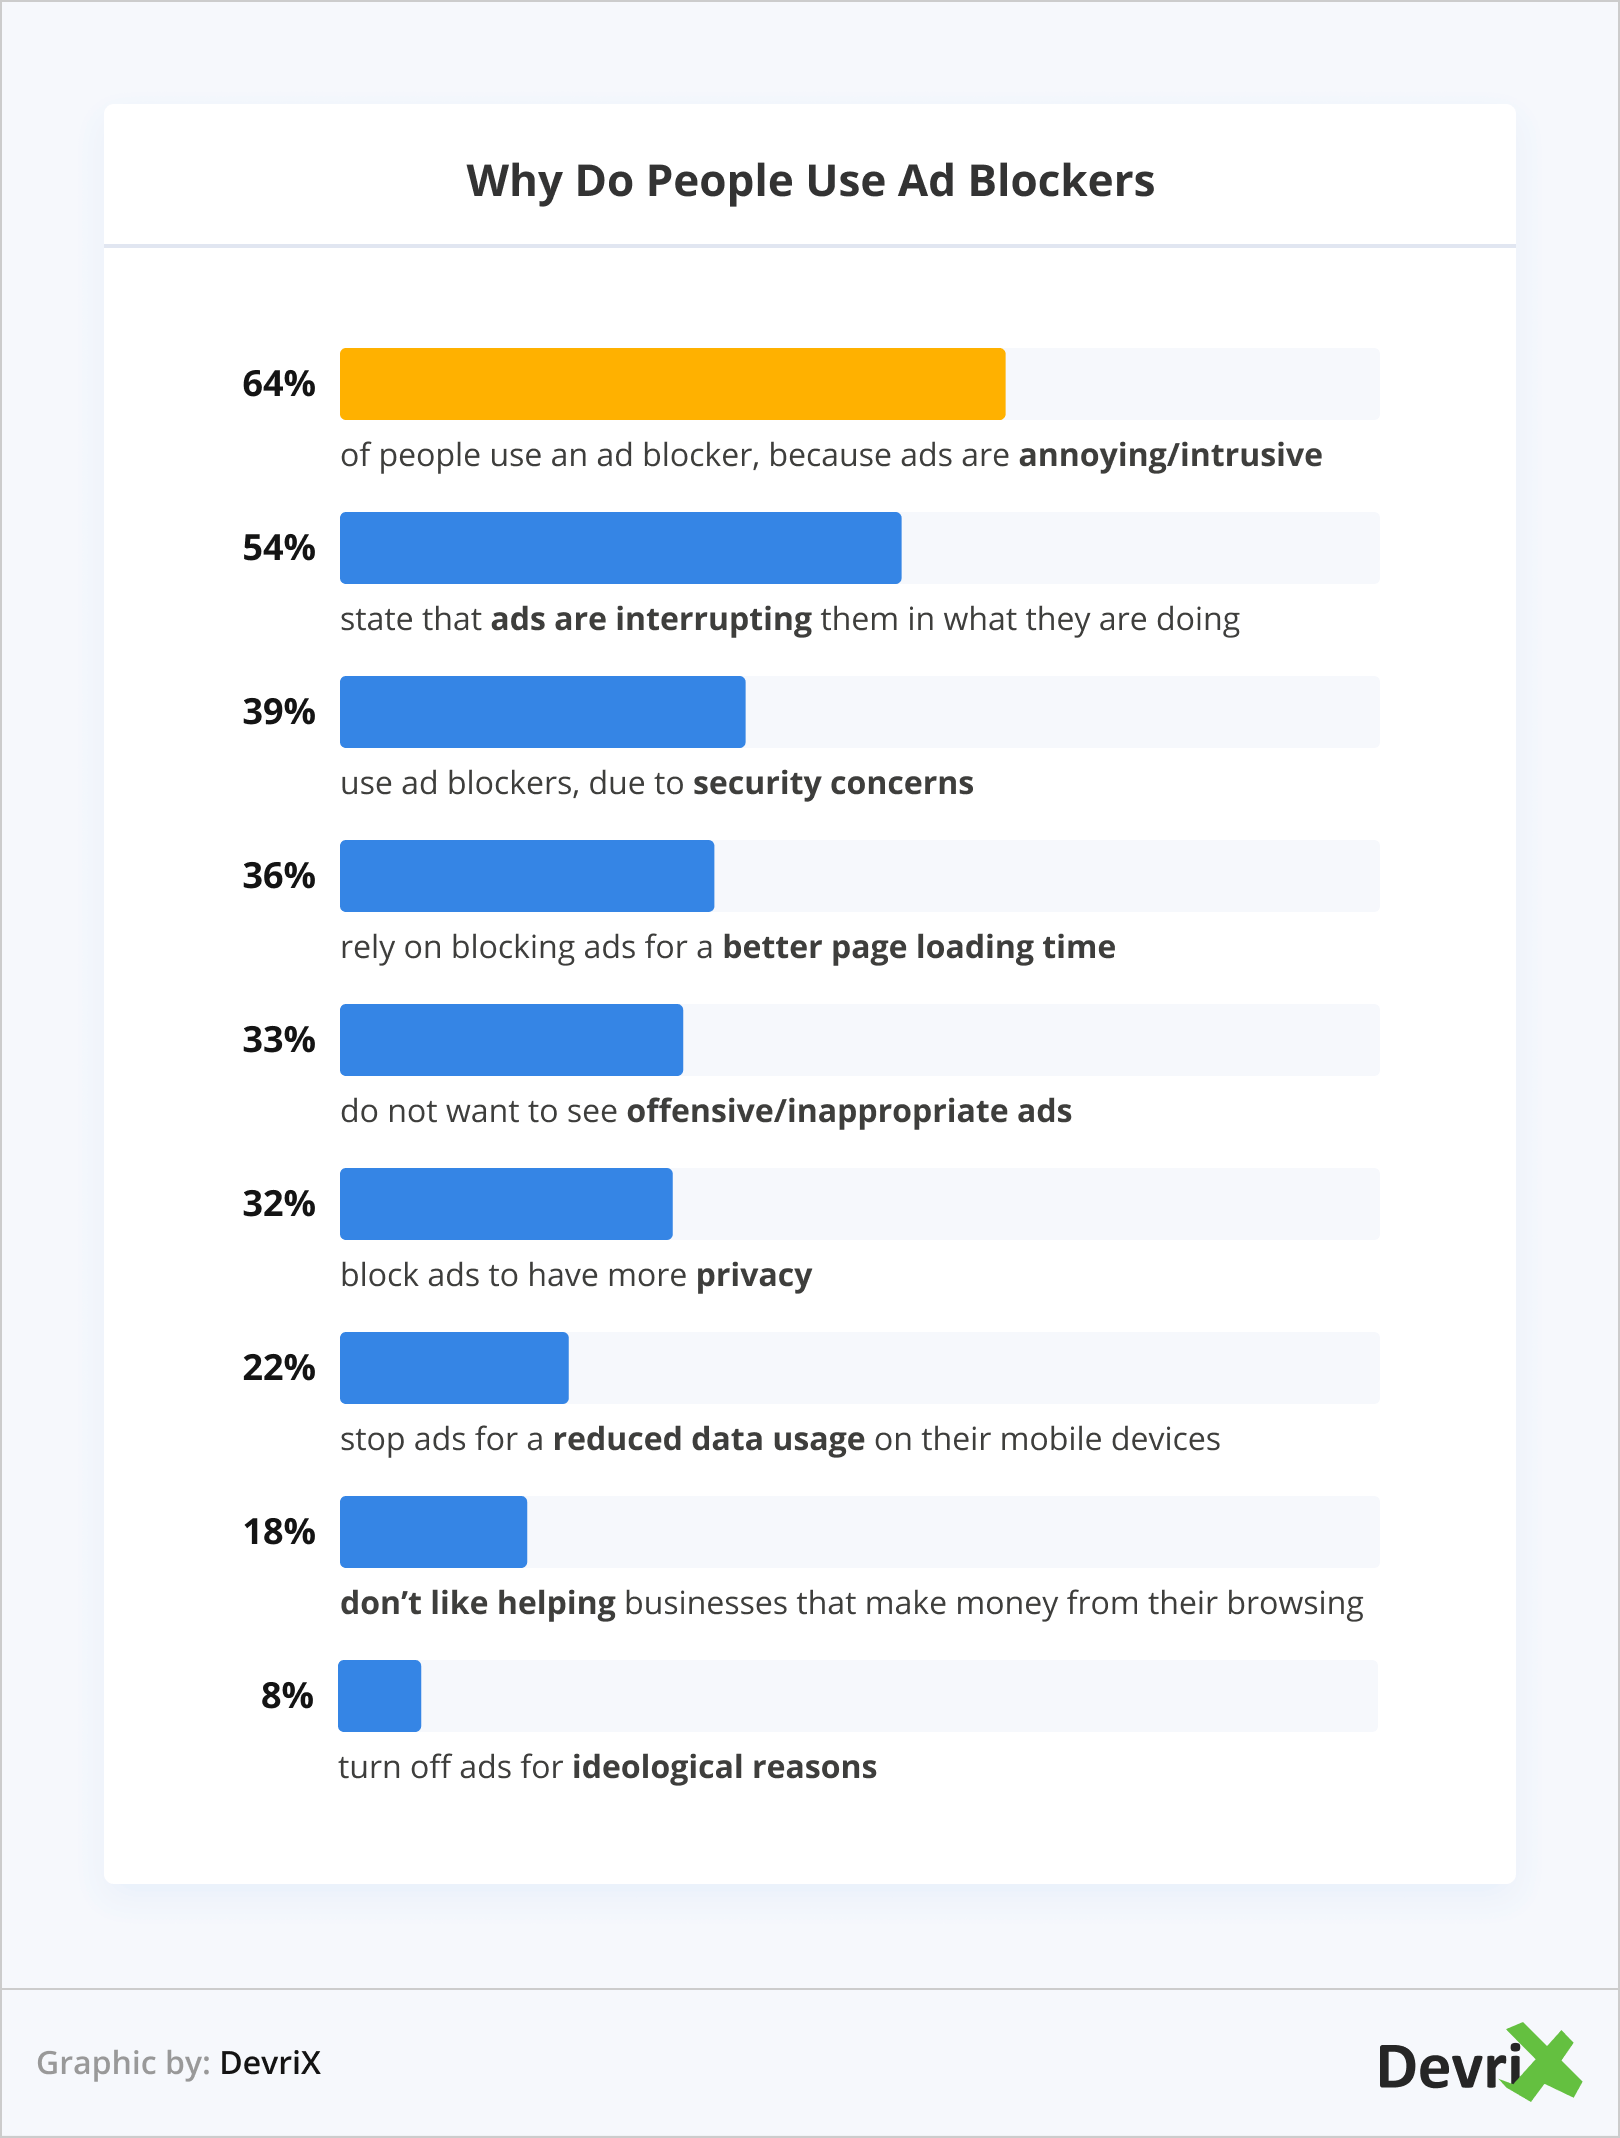 Bar chart showing the top reasons why people use ad blockers: annoying ads, interruptions, security concerns, faster loading, offensive content, privacy, reduced data use, and not supporting ad revenues